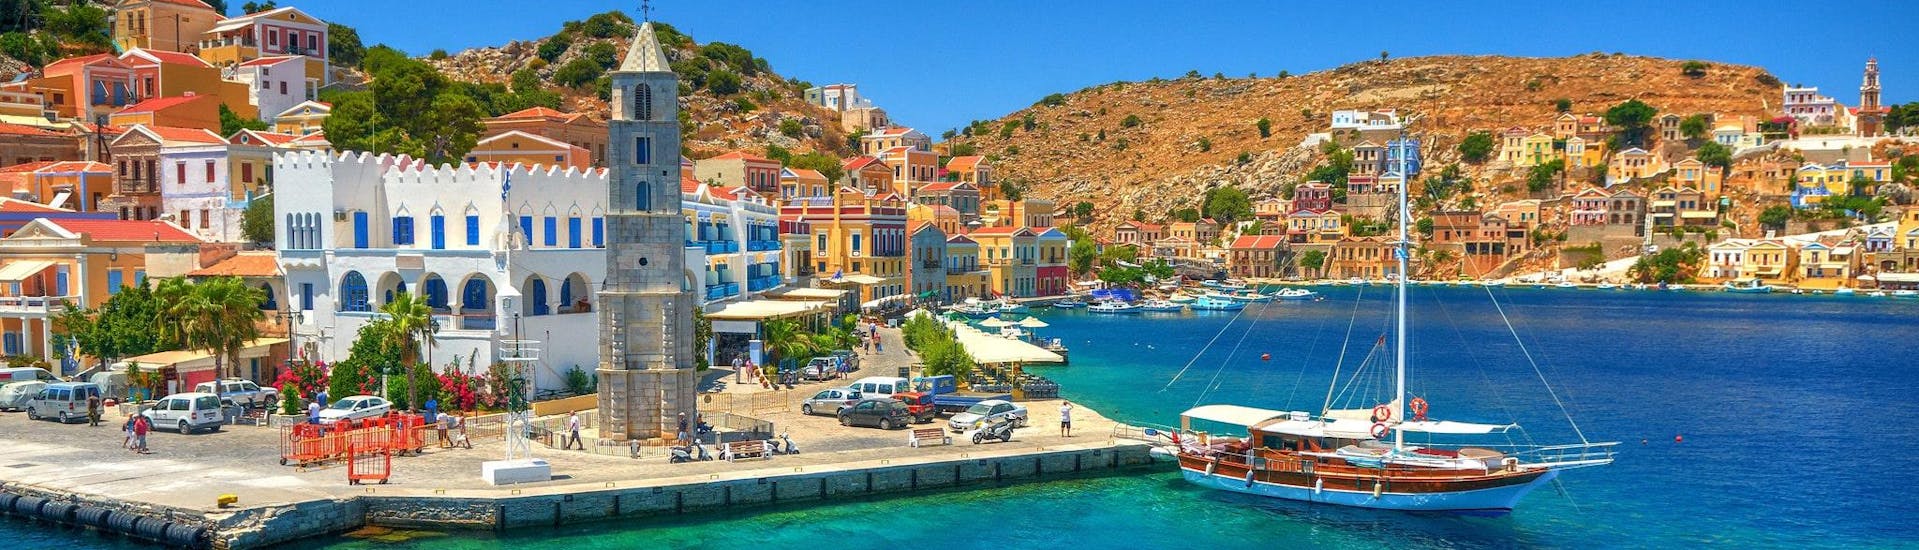 The port of Symi Island, which is a destination for many boat trips.